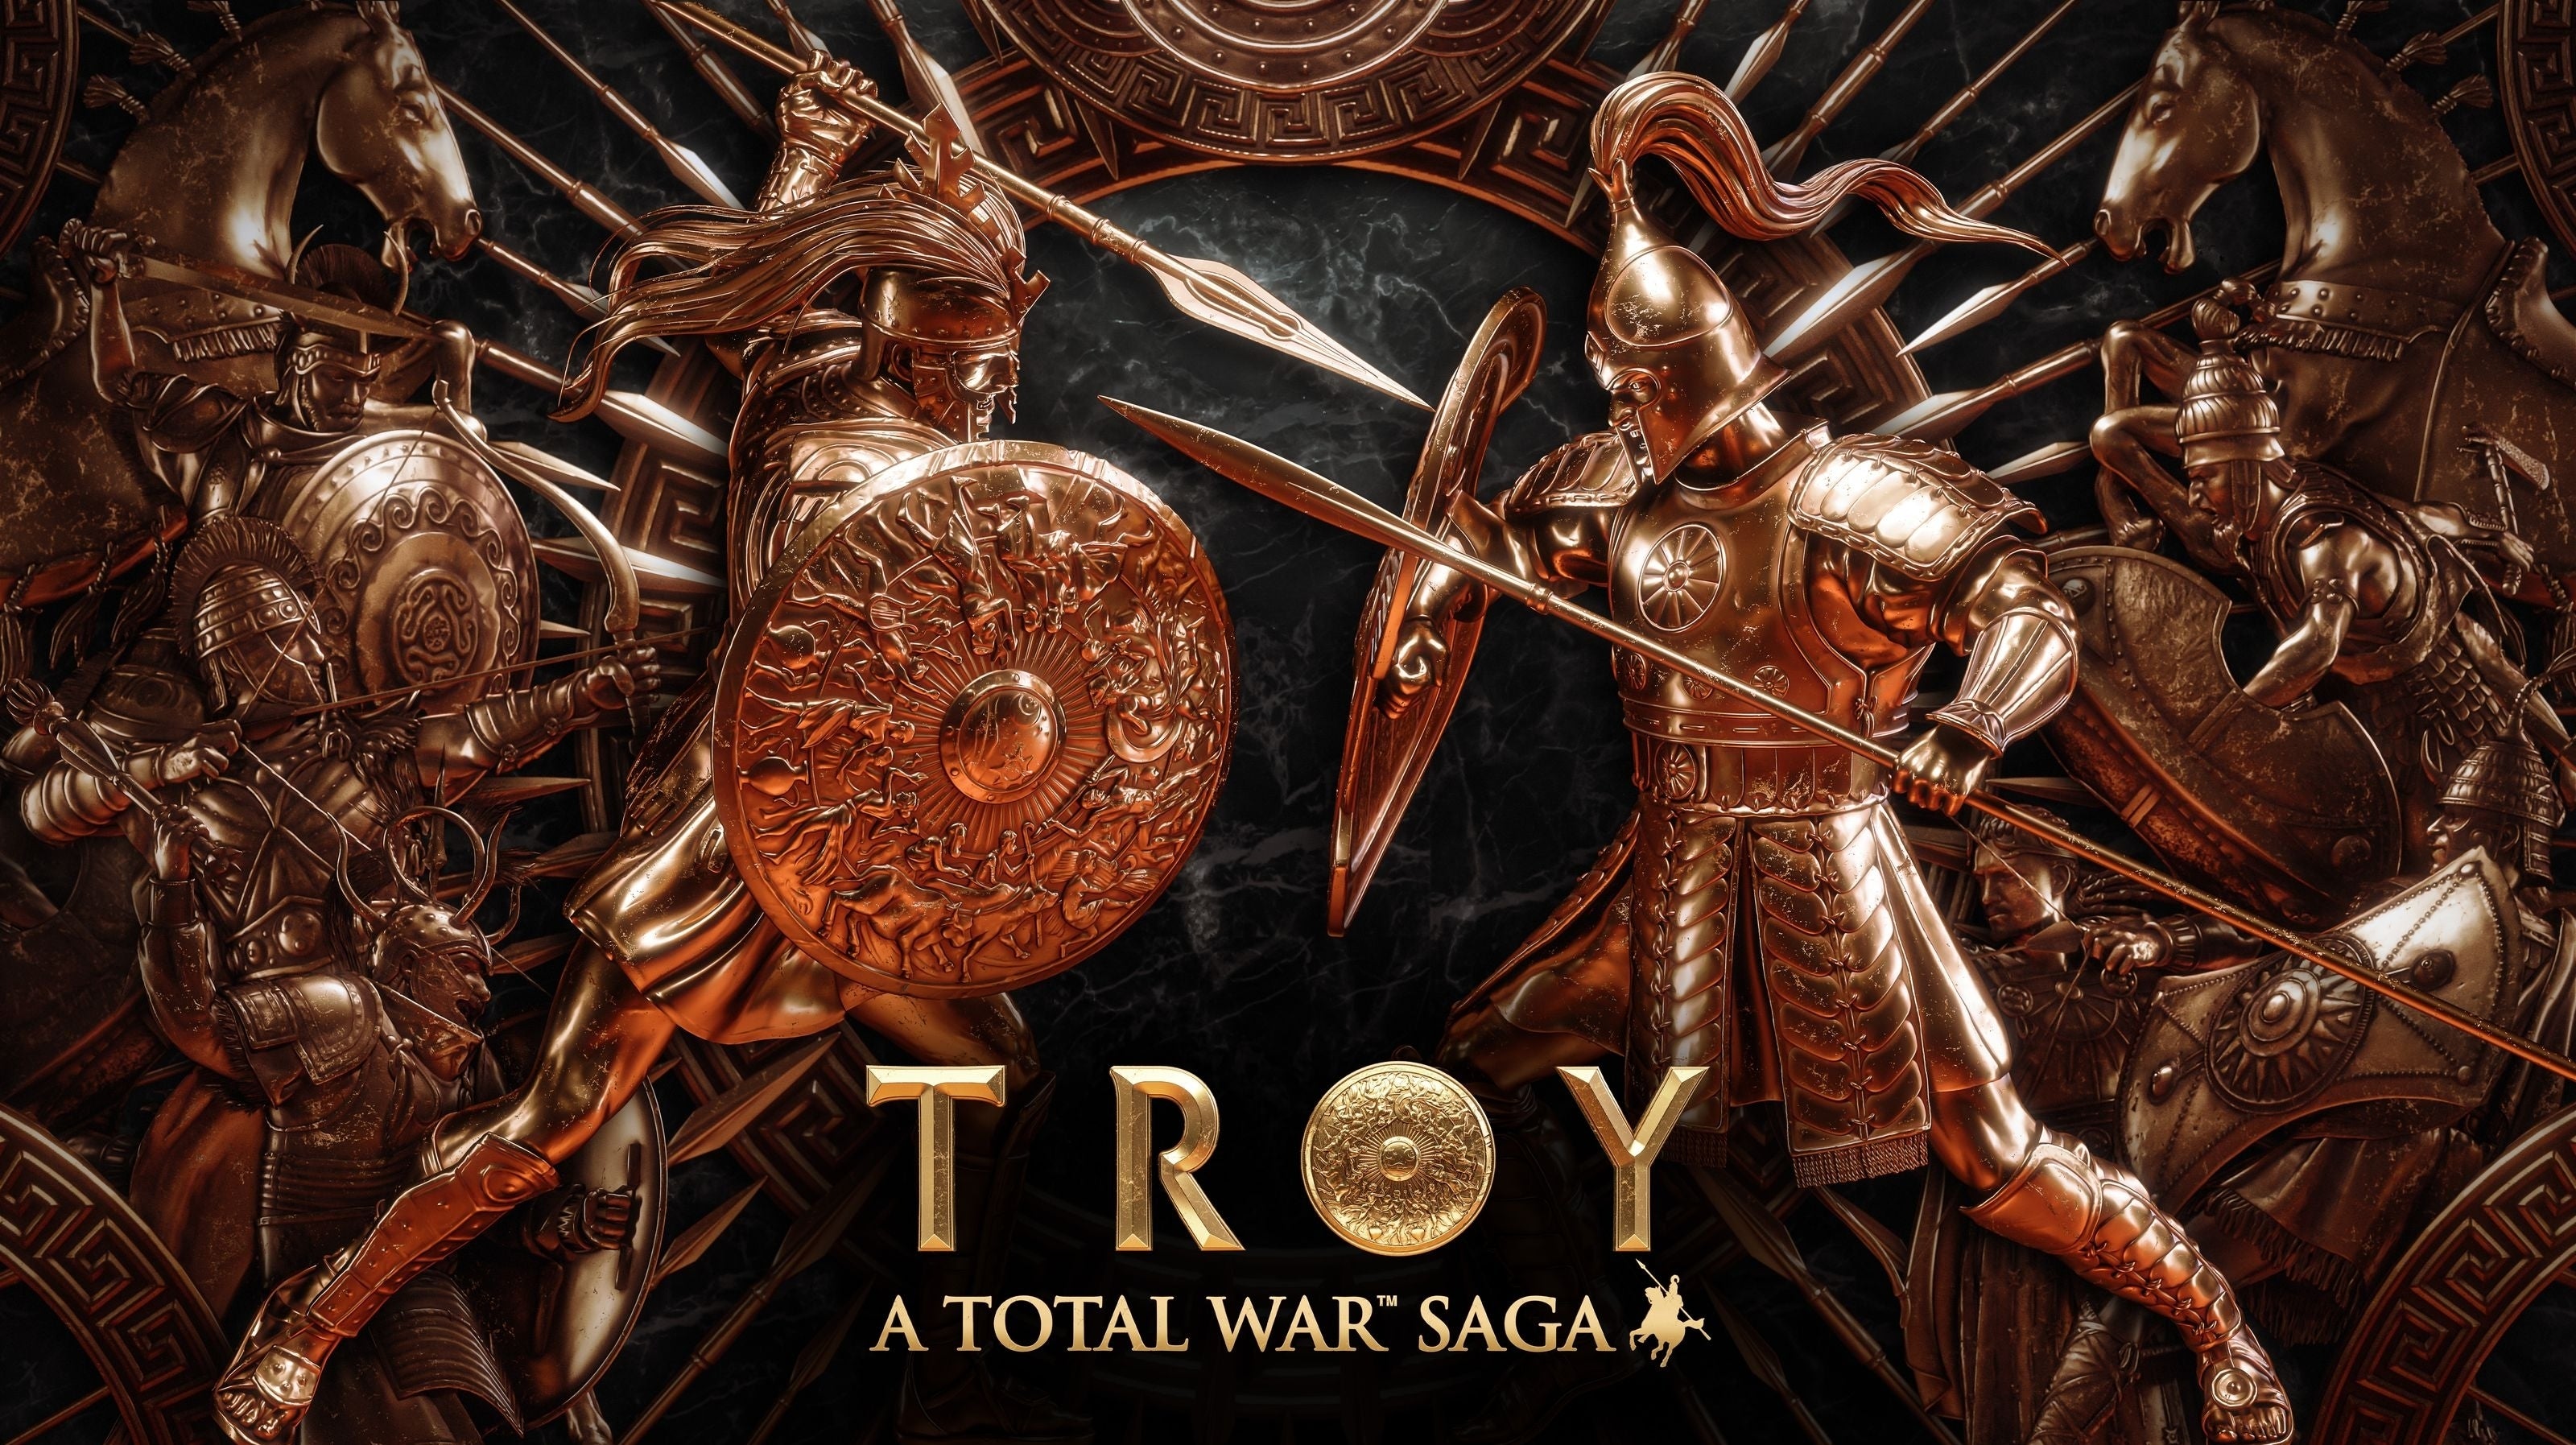 Image for Total War Saga: Troy's battles feel a tad dry, but its mythology is fascinating